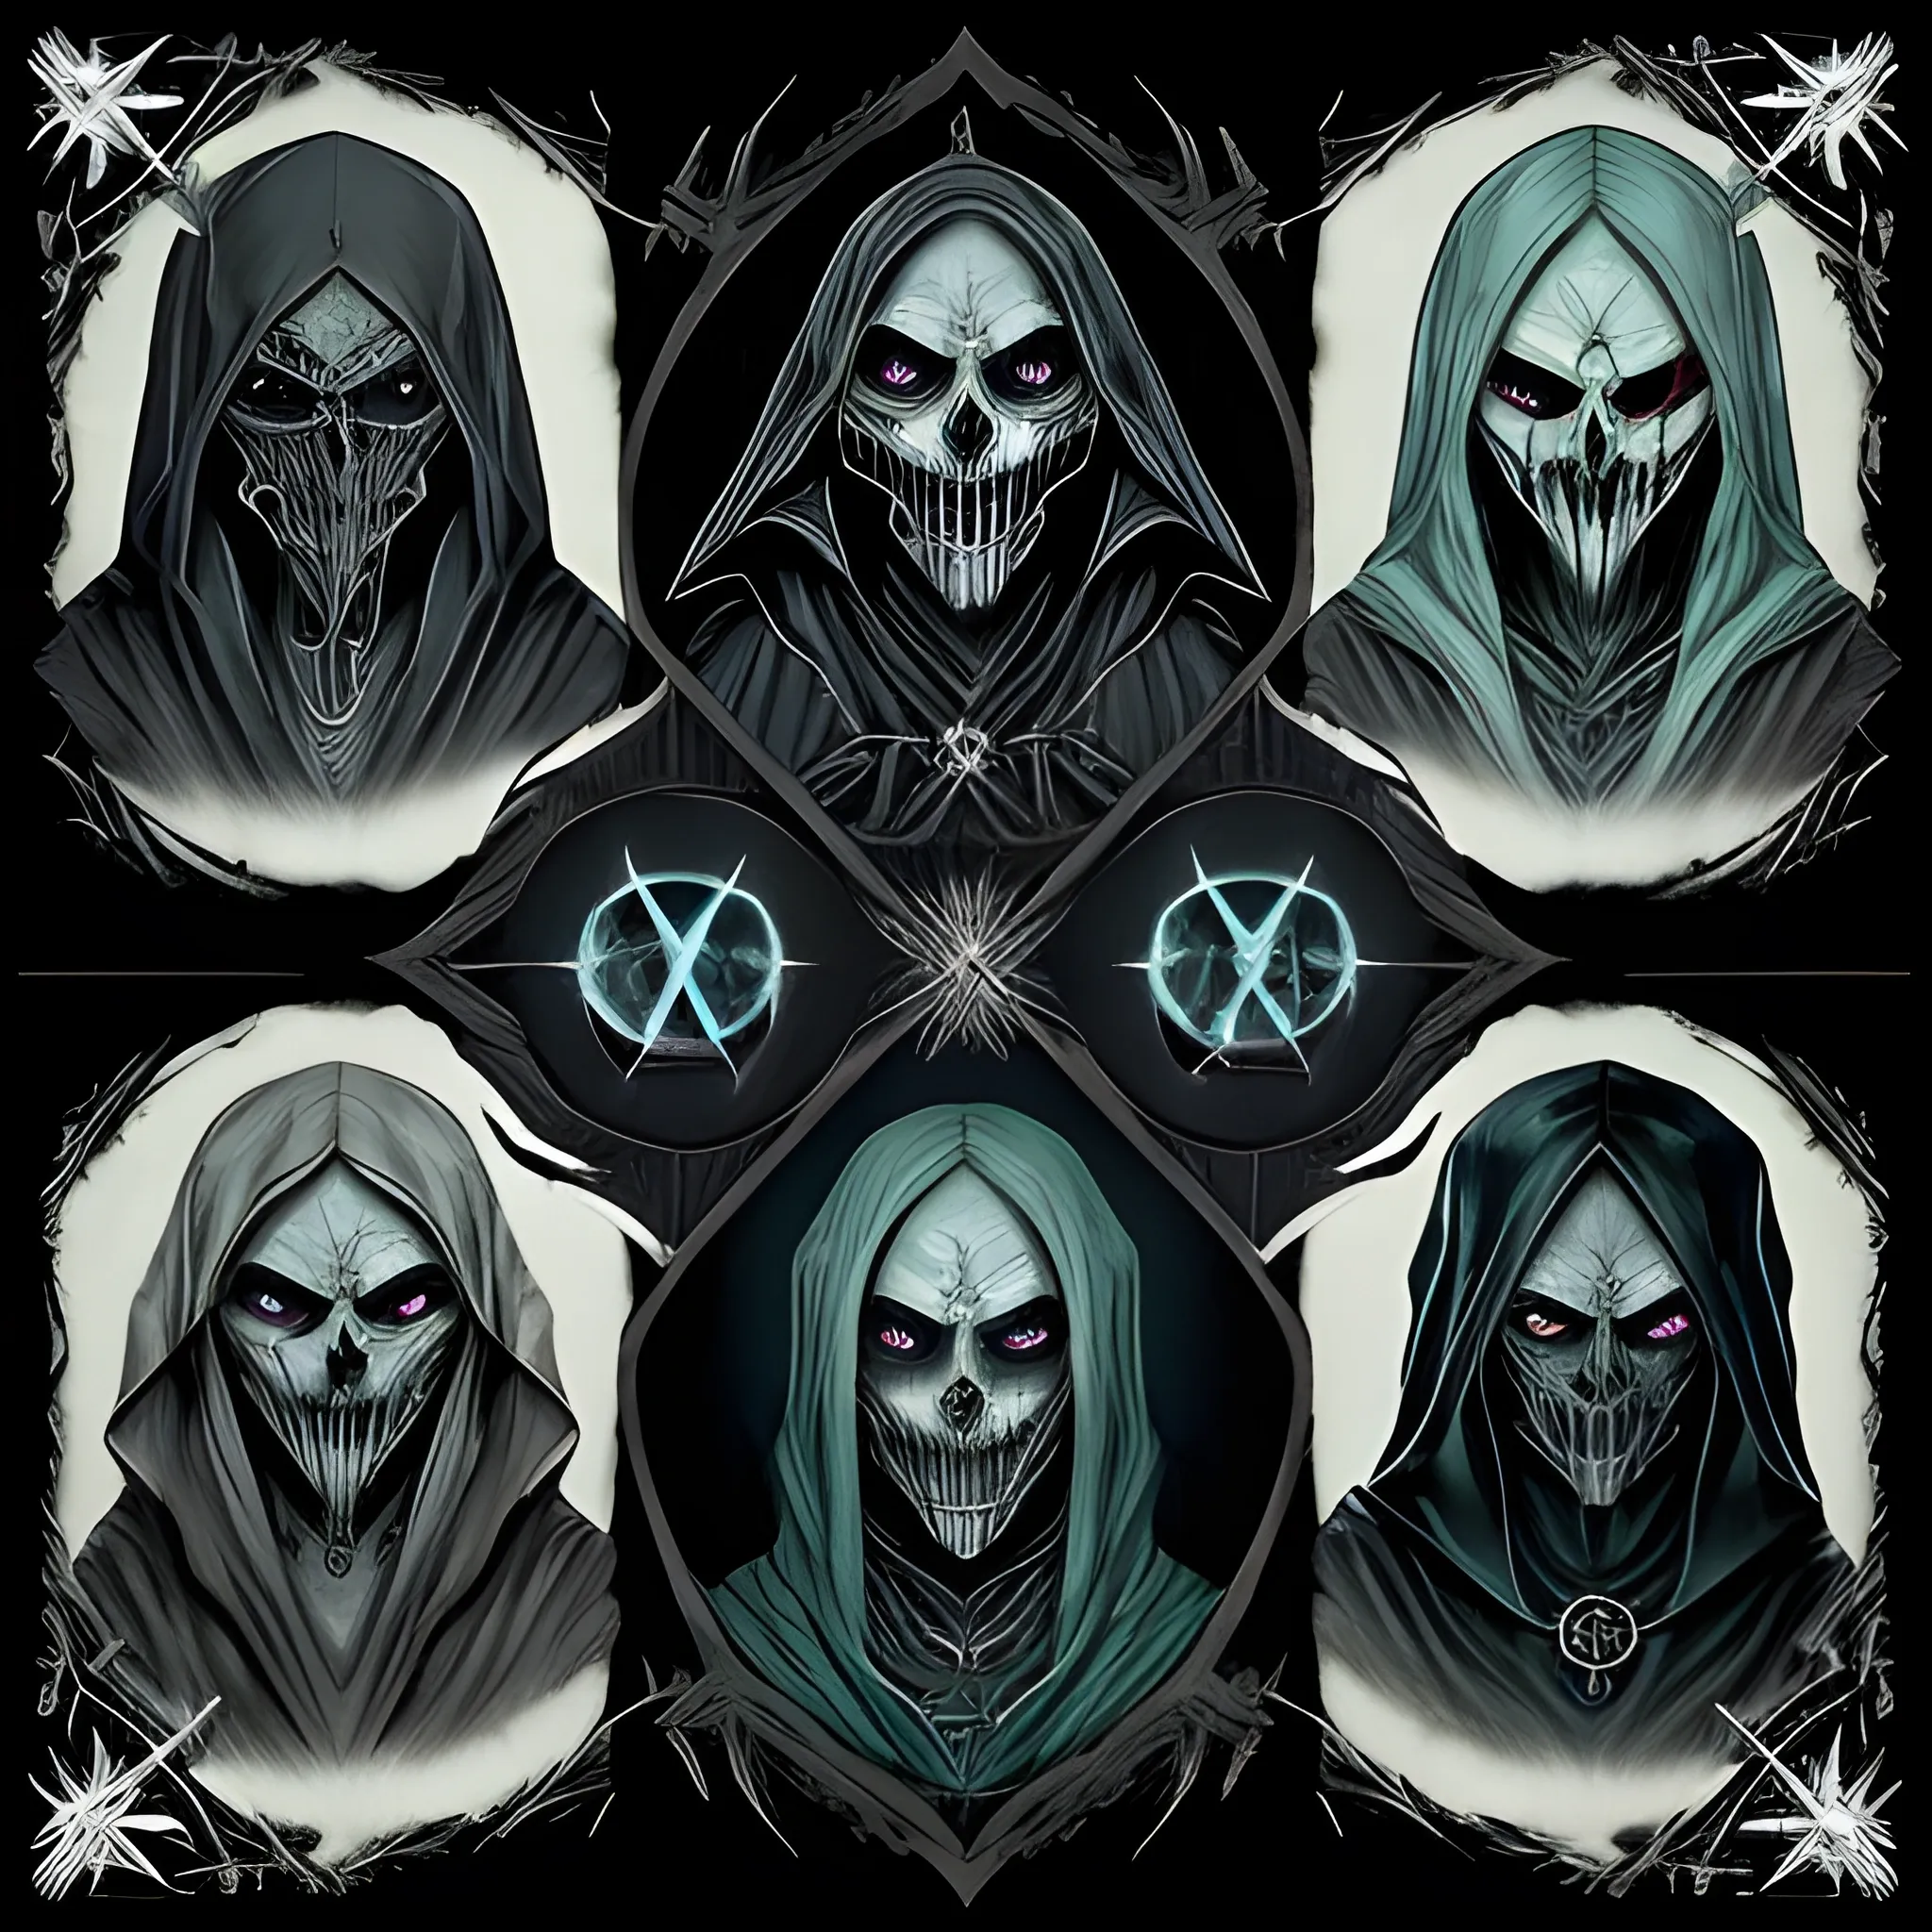 Dark Attire: The cultists wear long, flowing robes in shades of deep purple, black, or dark gray. The robes are often adorned with occult symbols and sigils associated with necromantic magic and Malachi's dark influence. The hoods of their robes are typically pulled up, casting shadows over their faces, giving them an air of mystery and menace.

Face Coverings: Some cultists wear face coverings or masks, further obscuring their features. These coverings often feature unsettling designs, such as skeletal faces or demonic visages, symbolizing their allegiance to death and darkness.

Occult Accessories: Cultists may wear various occult accessories, such as bone necklaces, finger bones, or amulets adorned with dark gems or symbols. These items are believed to channel the powers of necromancy and connect the wearer to the forces of evil.

Pallid Skin: Prolonged exposure to dark magic and their devotion to Malachi may give the cultists' skin a sickly pallor, further emphasizing their otherworldly appearance.

Glowing Eyes: In some cases, the eyes of the cultists may glow with an unnatural or eerie light, hinting at their connection to the dark powers they serve. The glow can be a pale blue, sickly green, or even crimson, depending on the nature of their necromantic abilities.

Ritualistic Tattoos: Some cultists bear ritualistic tattoos etched into their skin, marking their allegiance to Malachi and the dark arts. These tattoos often depict ominous symbols, arcane runes, or images associated with death and decay.

Feral Traits: As a result of their embrace of dark powers, some cultists may display feral traits, such as elongated canine teeth or claw-like nails, reminiscent of creatures of the night.

Overall, the appearance of Malachi's cultists is haunting and unsettling, with an aura of darkness and malevolence. Their attire, accessories, and physical features convey their allegiance to the fallen Aasimar and their commitment to furthering his nefarious plans. As they move in shadows and secrecy, they pose a significant threat to the world, ready to carry out their master's bidding and plunge Lumina Isle into everlasting darkness.